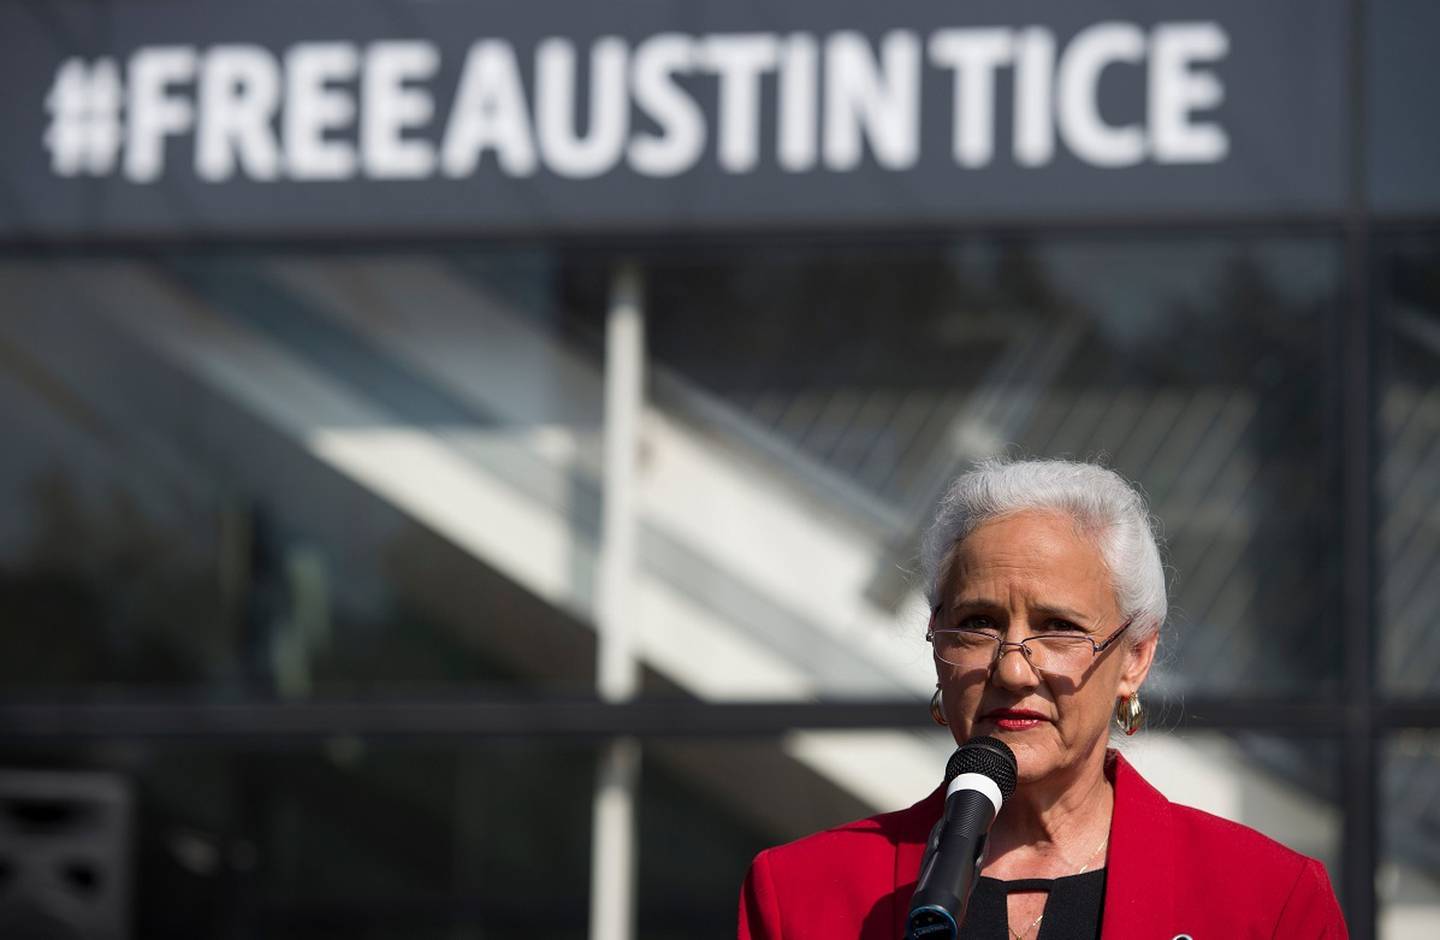 Debra Tice speaks about her son Austin Tice during the unveiling of a new banner calling for his release at the Newseum in Washington, DC on November 2, 2016.